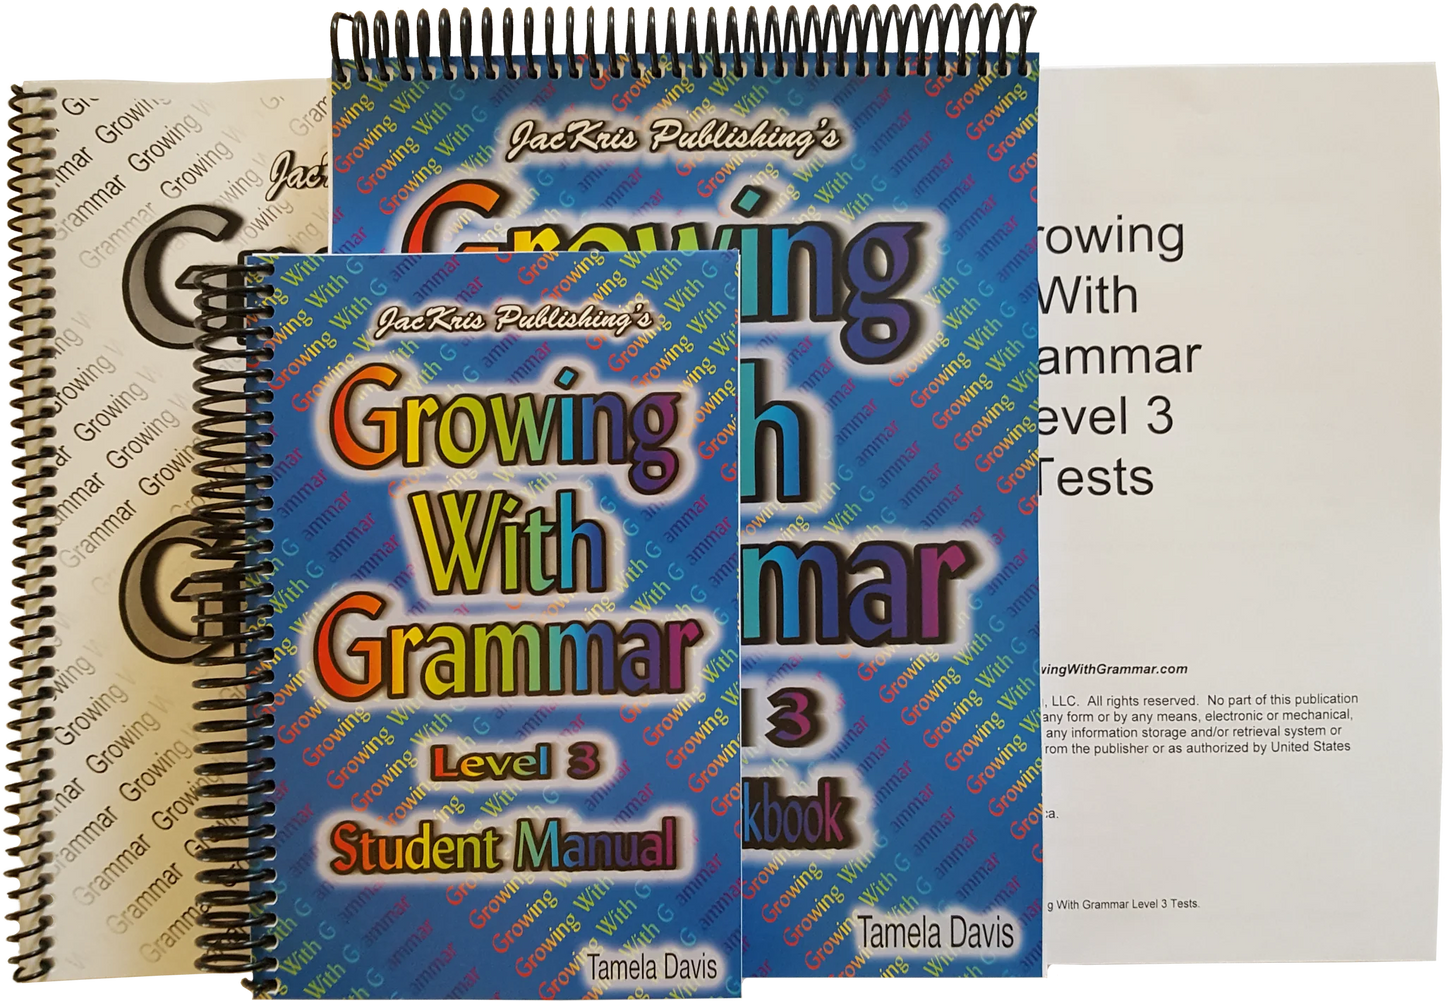 Growing with Grammar Level 3 Complete set (E283)